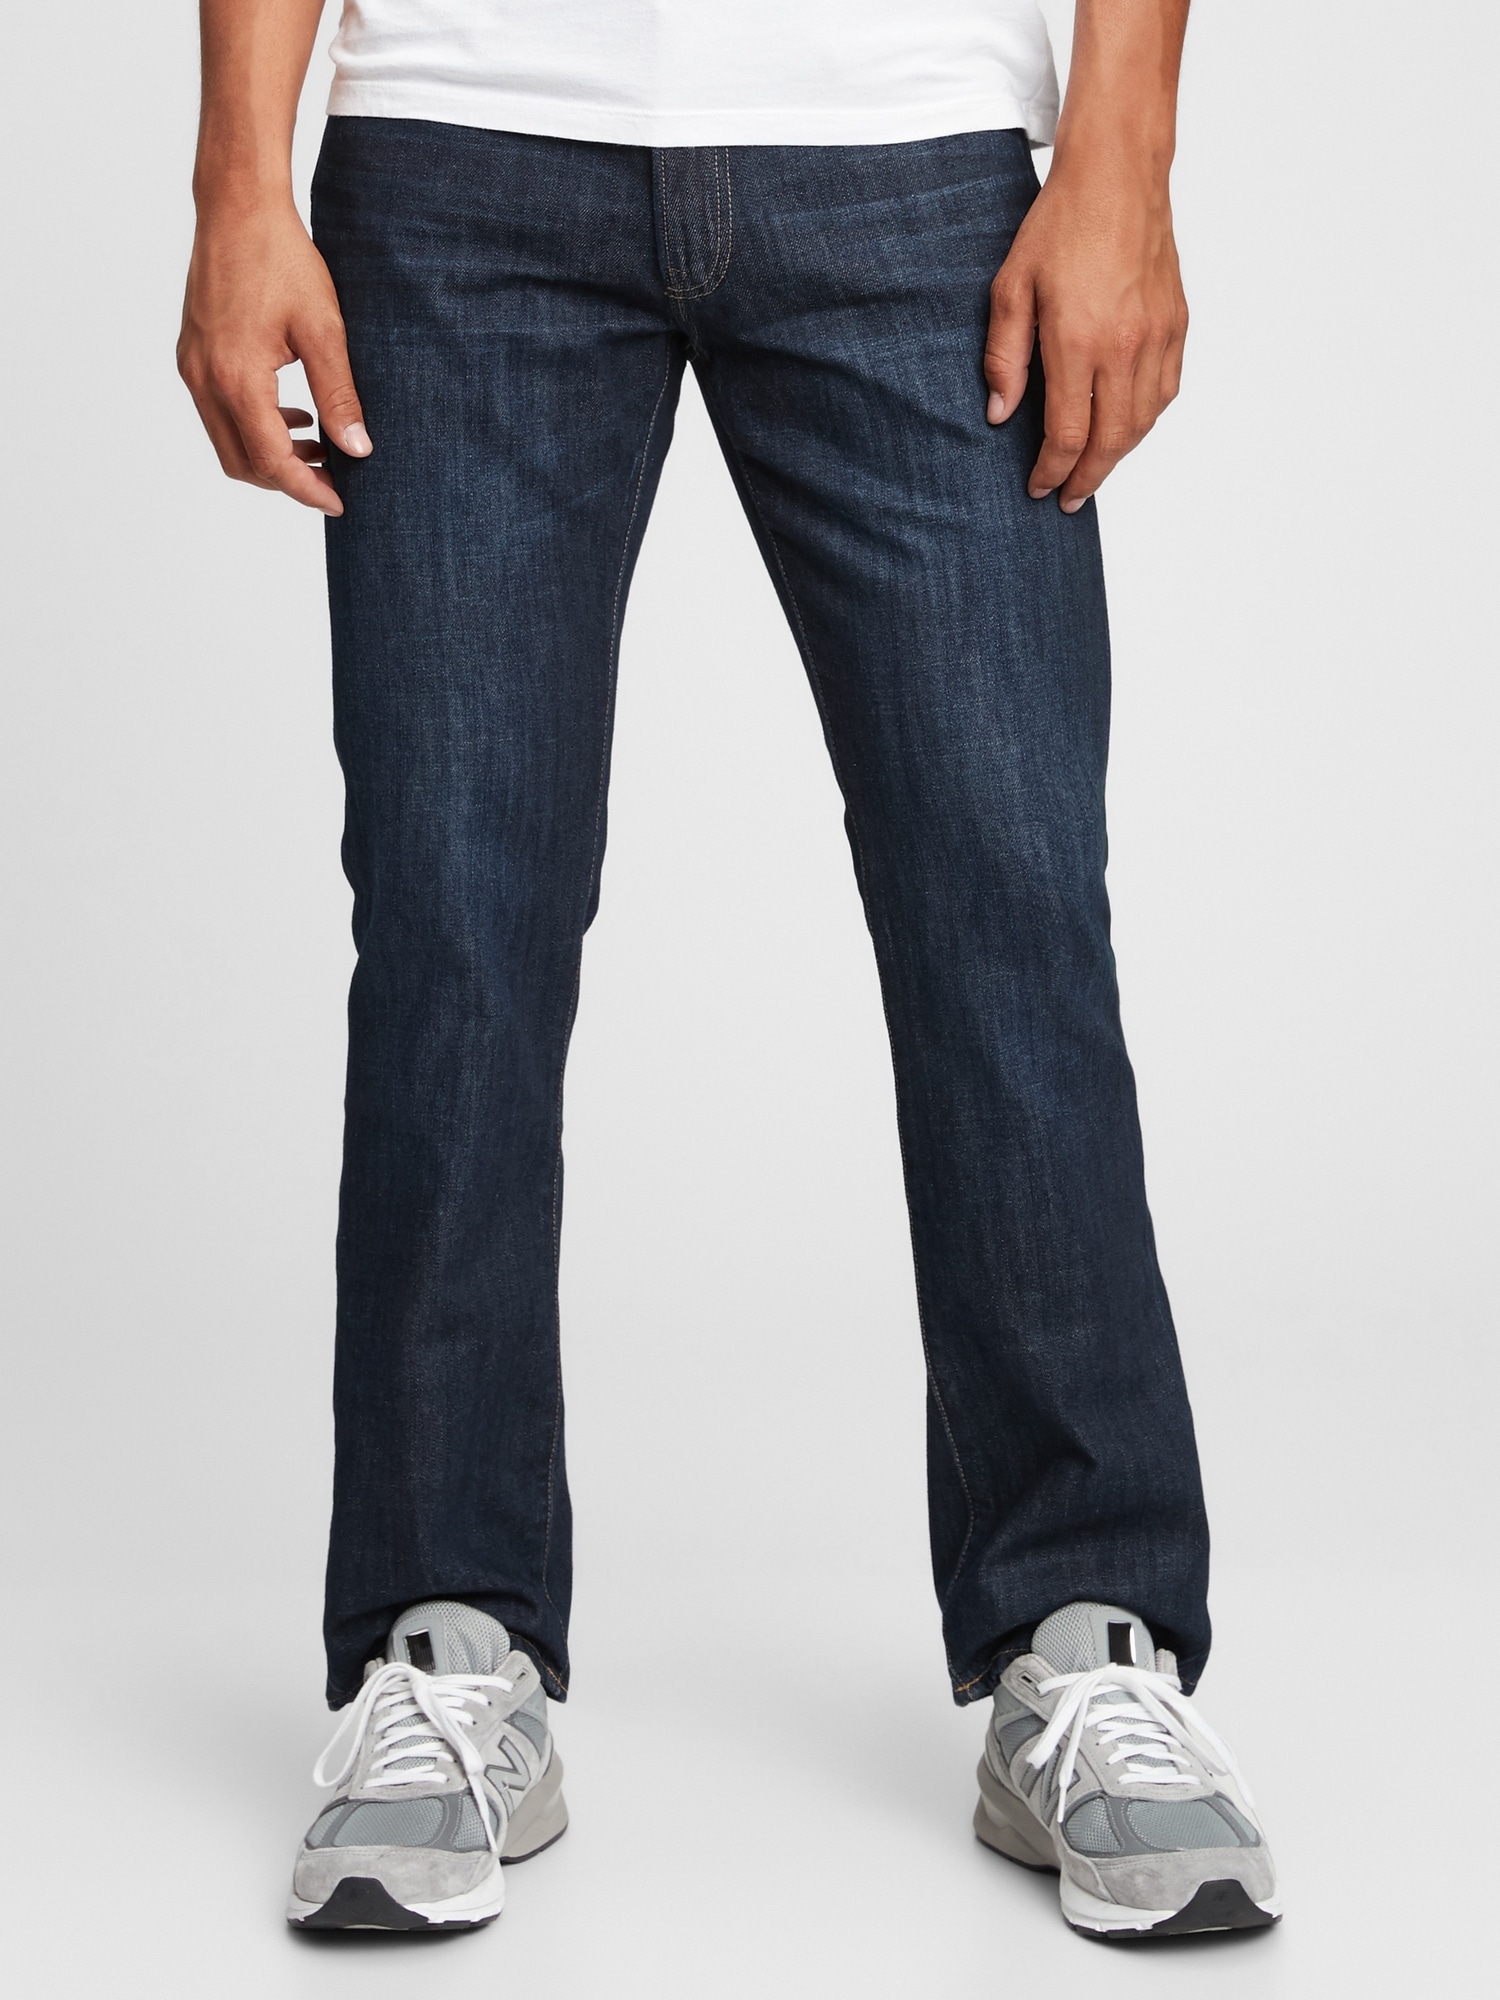 Gap Boot Jeans with Washwell blue. 1